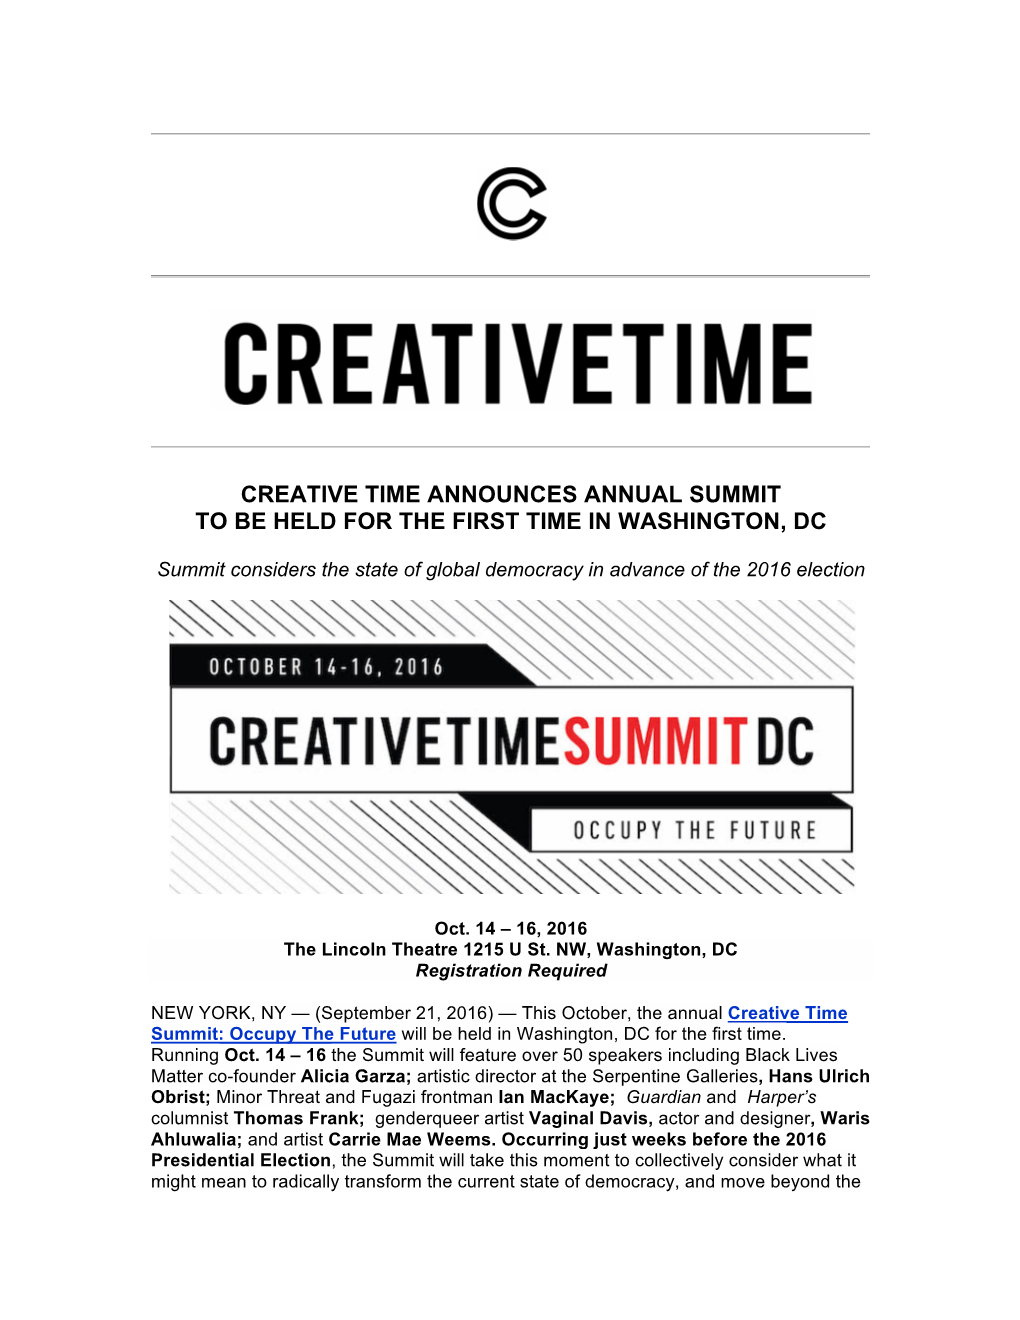 Creative Time Announces Annual Summit to Be Held for the First Time in Washington, Dc